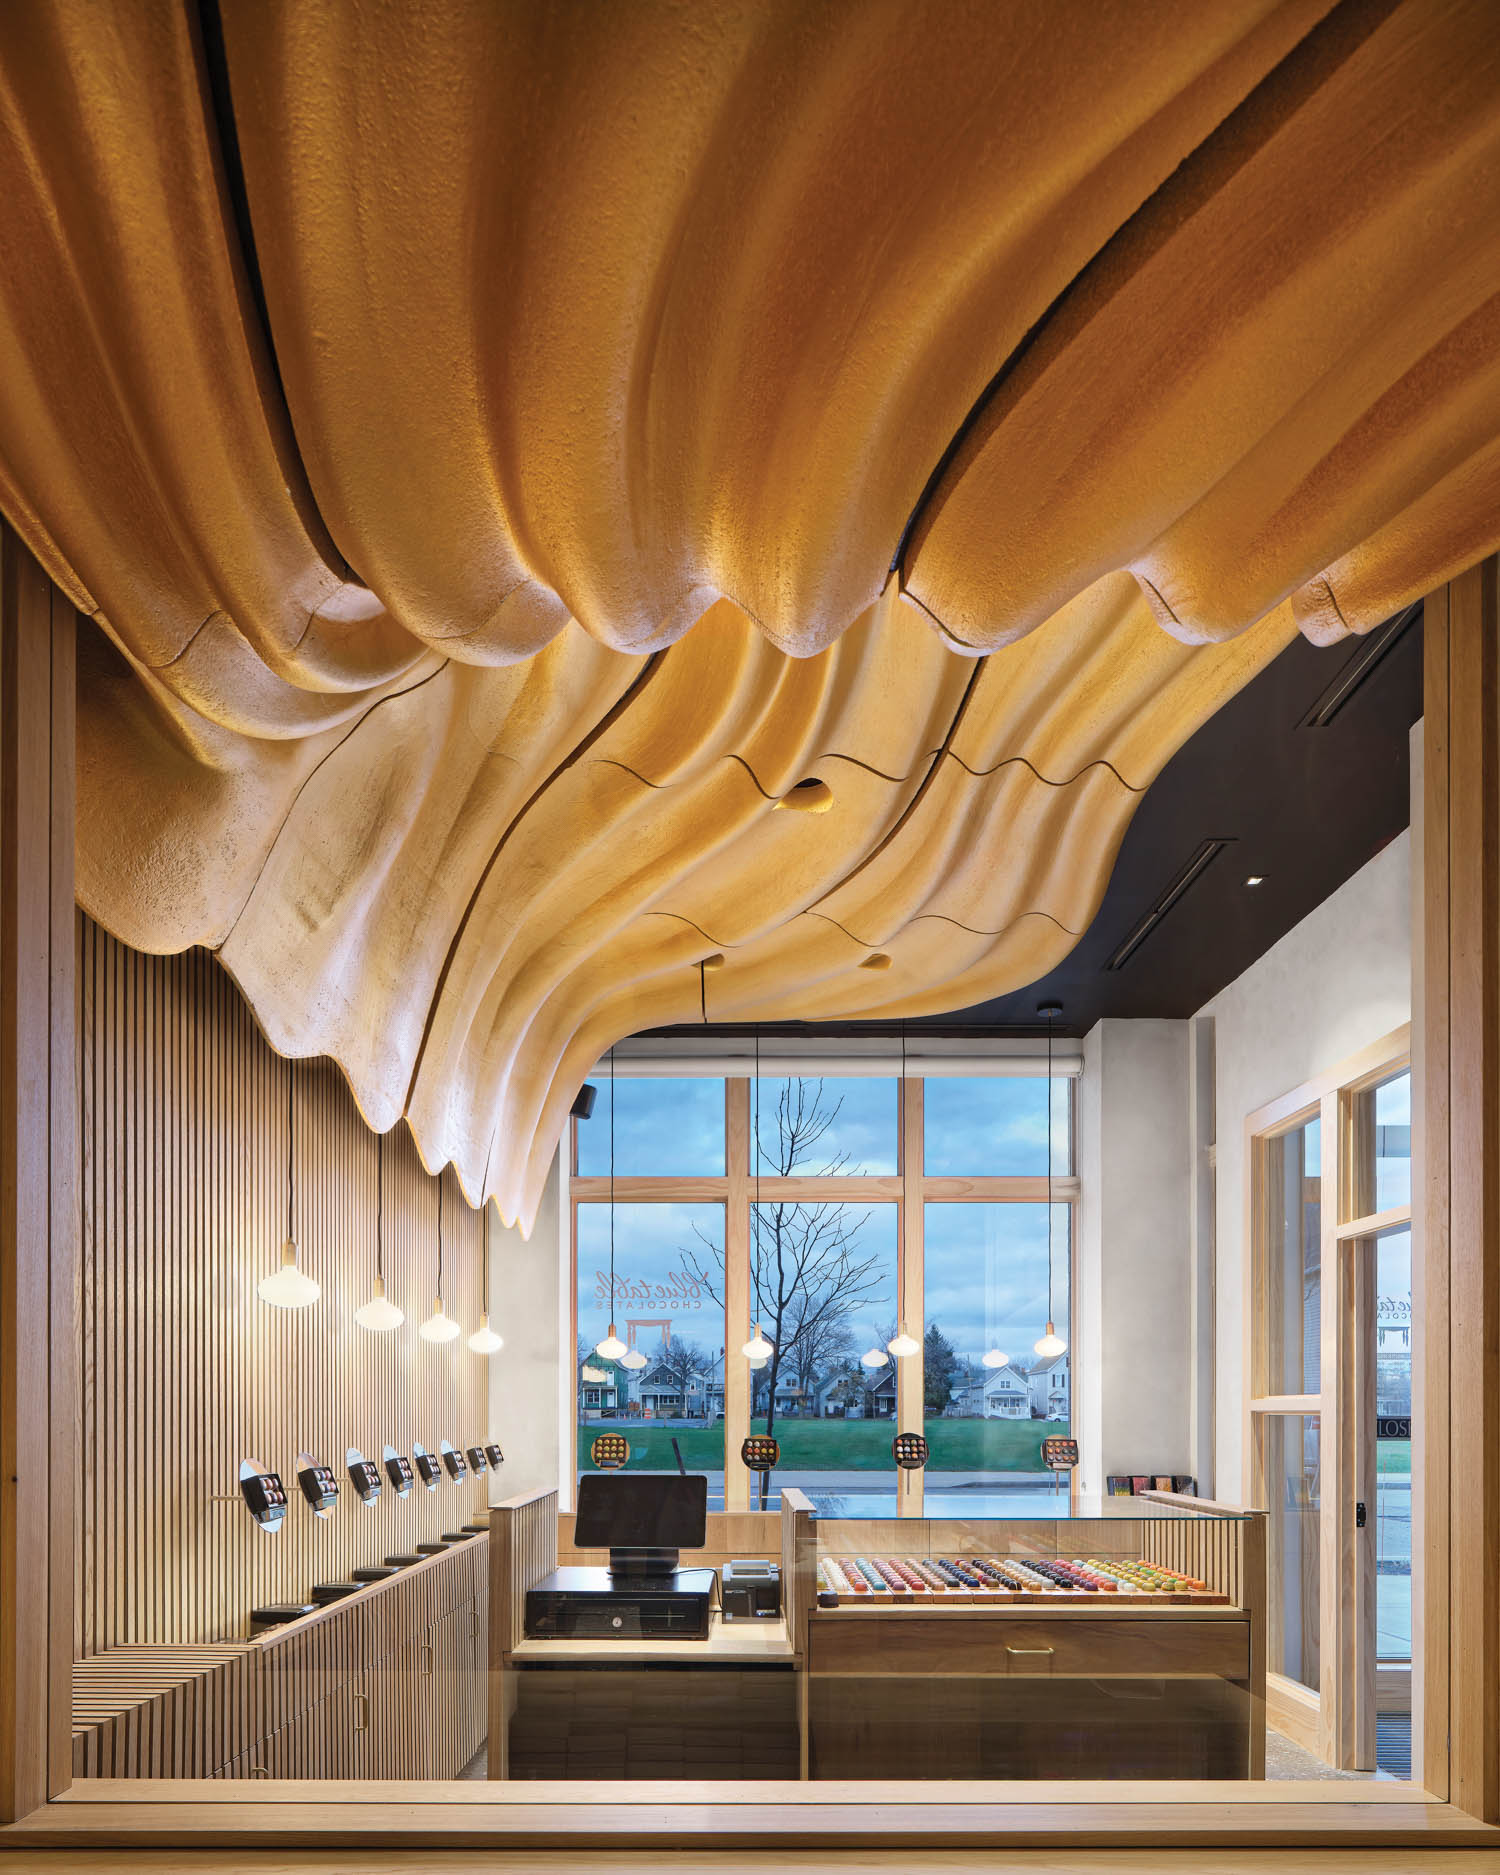 the wavy, river-like ceiling of a New York chocolate shop